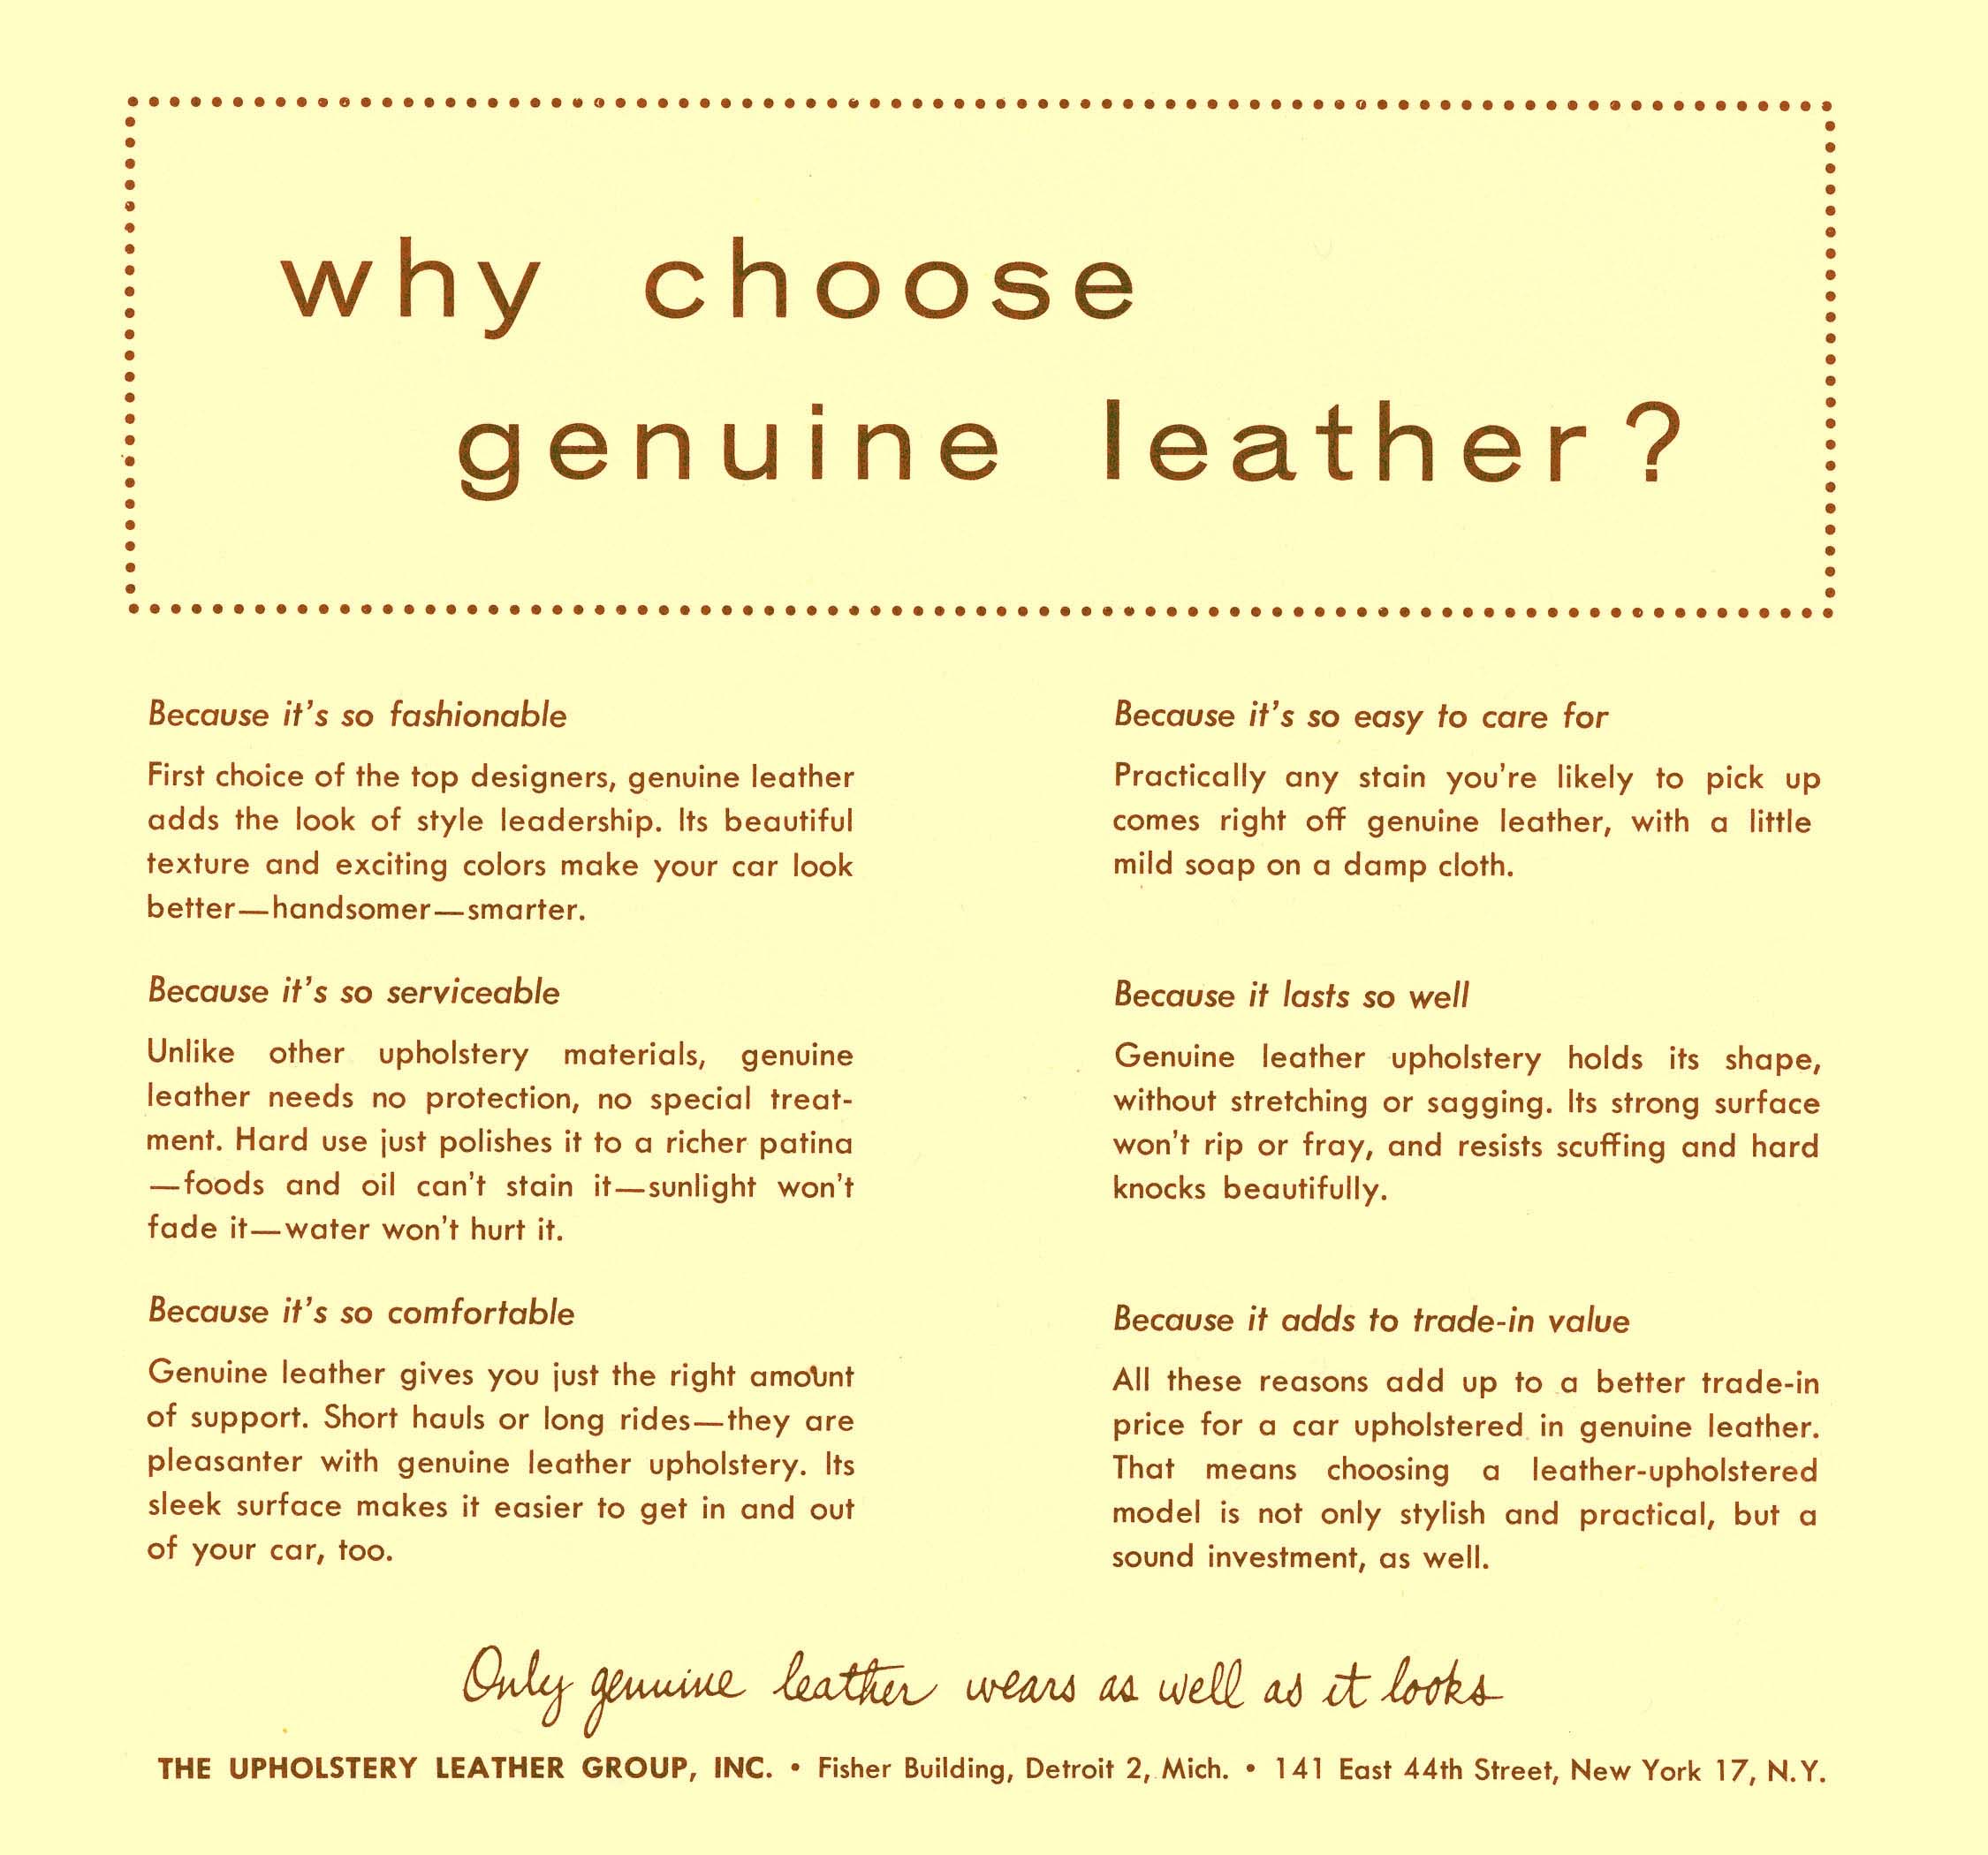 1957_Imperial_Genuine_Leather-02-03